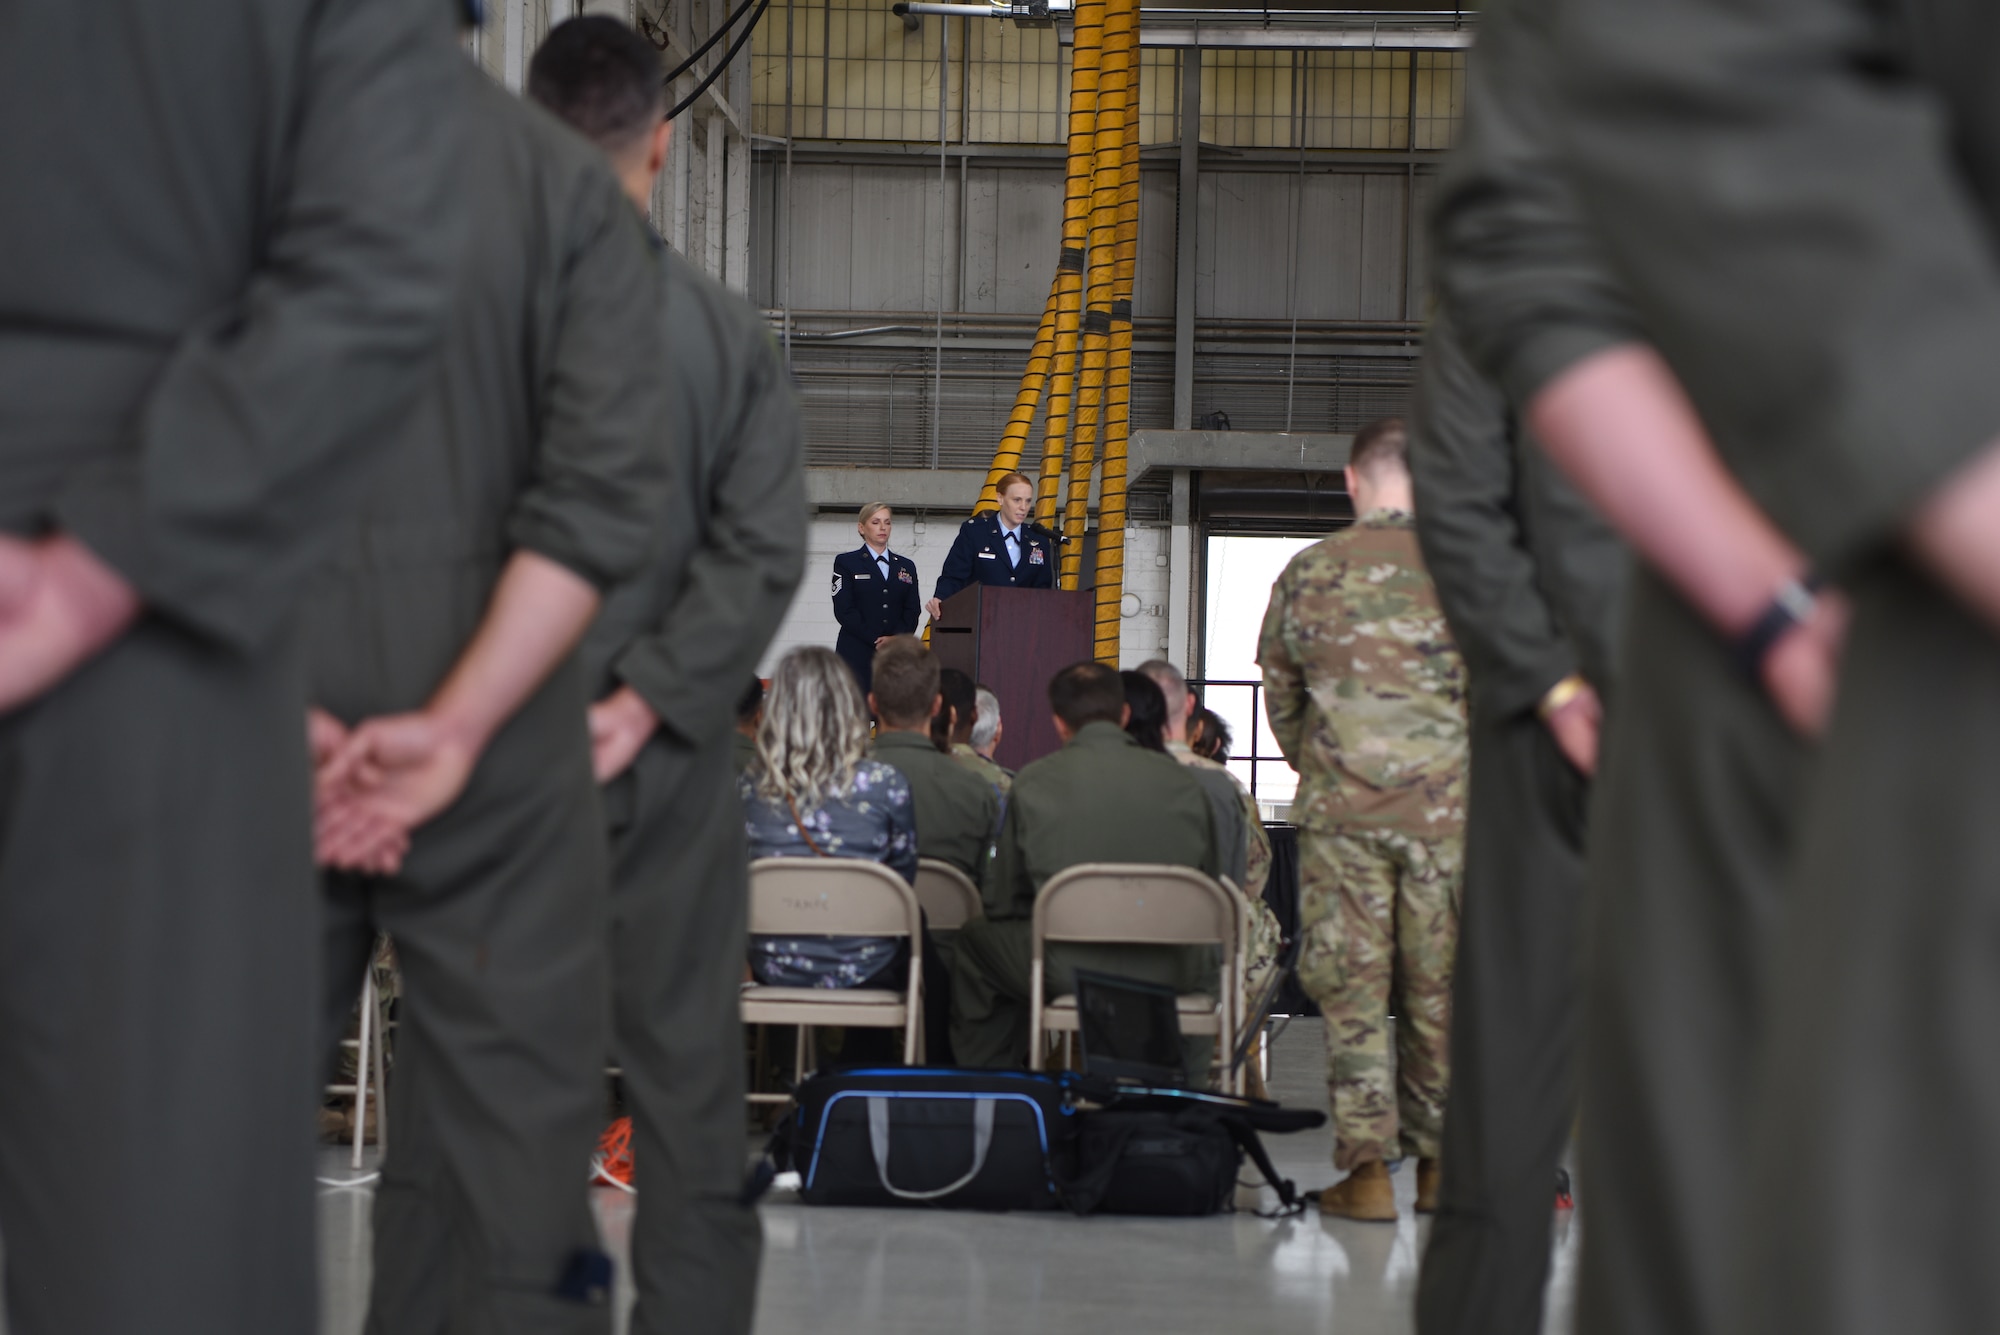 U.S. Air Force Lt. Col. Kristen Jenkins, 28th Bomb Squadron commander, delivers remarks after assuming command of the squadron during the 28th BS change of command ceremony inside the Three Bay Hangar at Dyess Air Force Base, Texas, April 22, 2022. Jenkins assumed command of the 28th BS which provides all B-1 initial qualification and instructor upgrade training. (U.S. Air Force photo by Staff Sgt. Holly Cook)